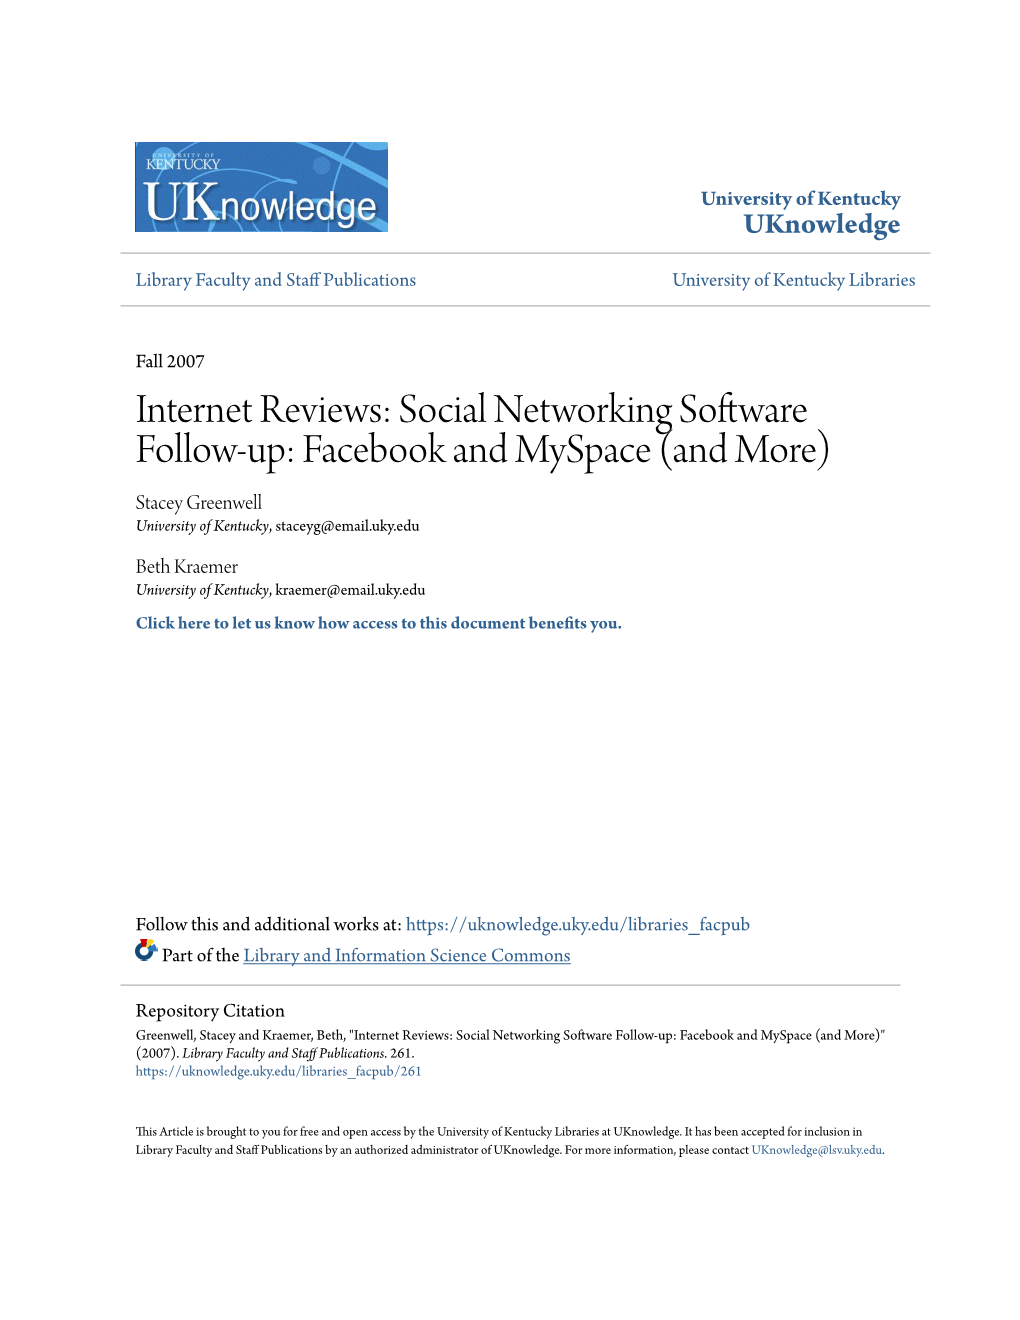 Social Networking Software Follow-Up: Facebook and Myspace (And More) Stacey Greenwell University of Kentucky, Staceyg@Email.Uky.Edu